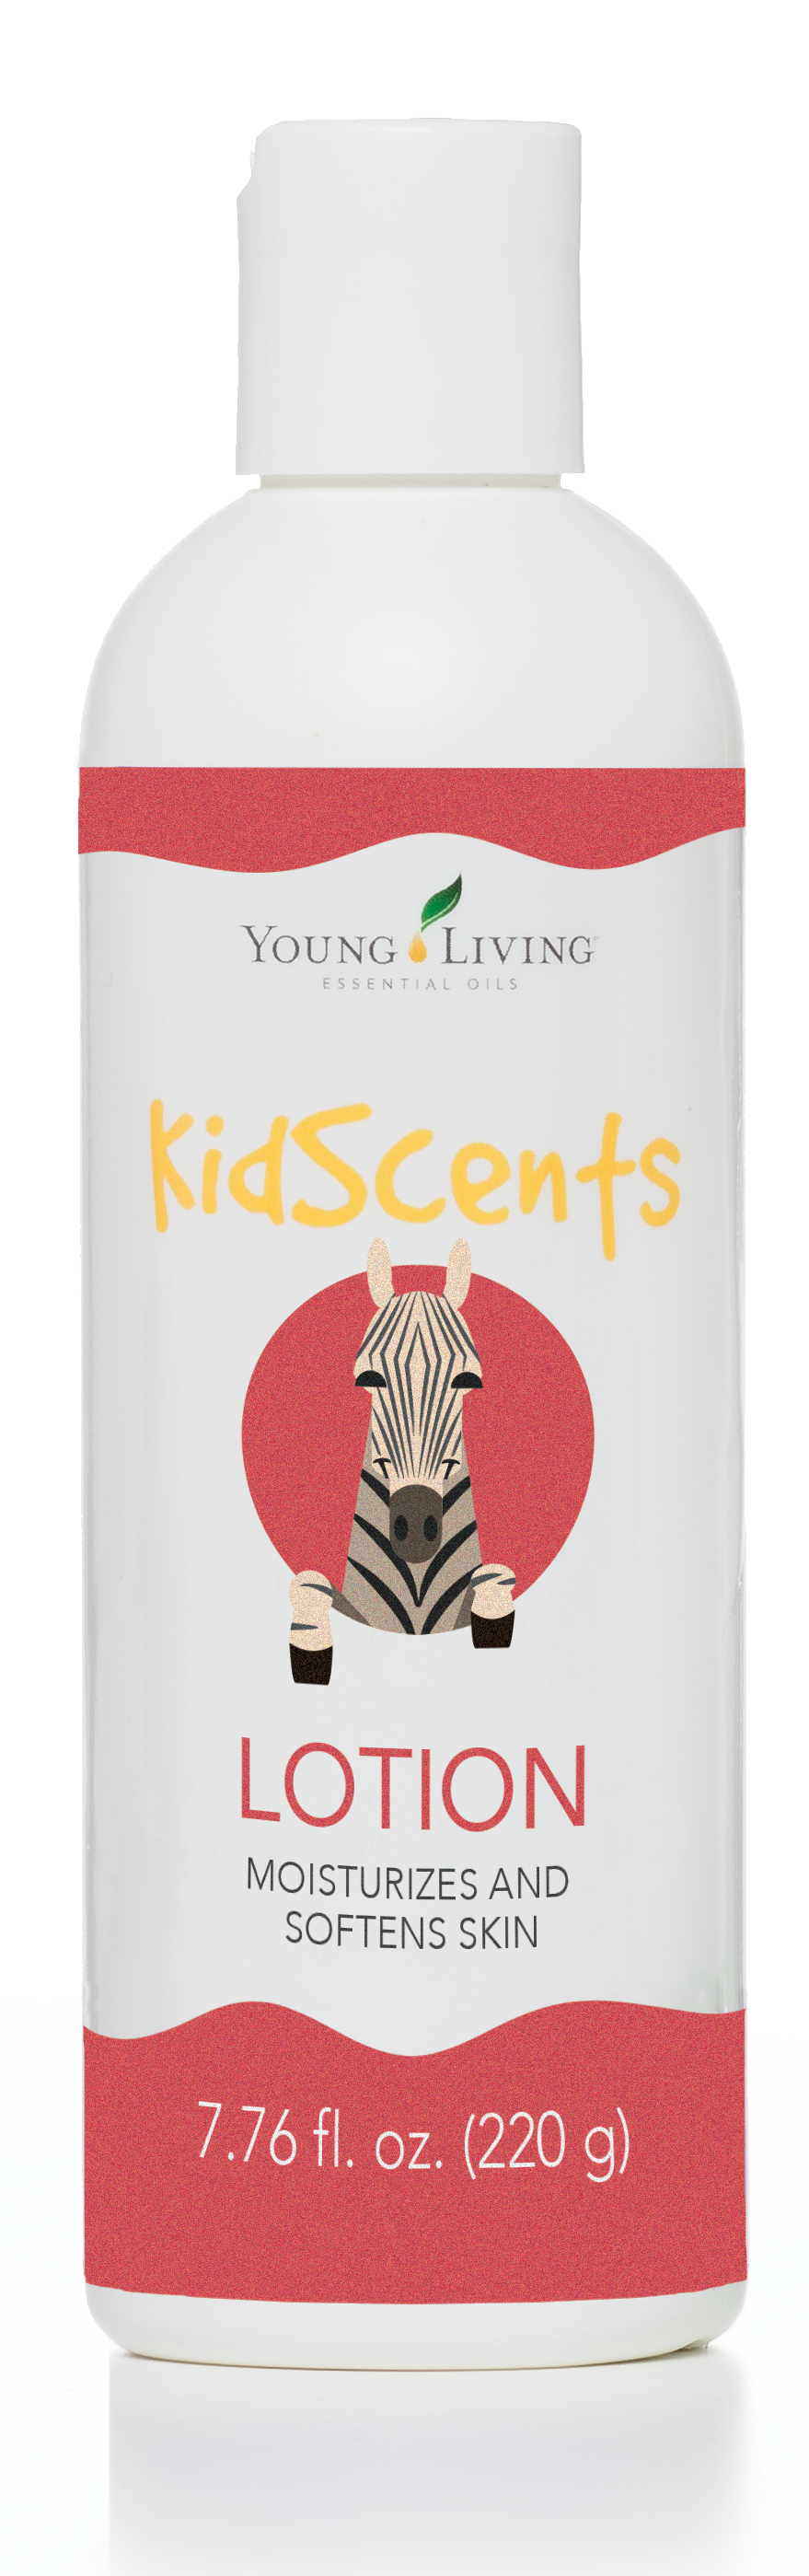 KidScents Lotion Silo.png